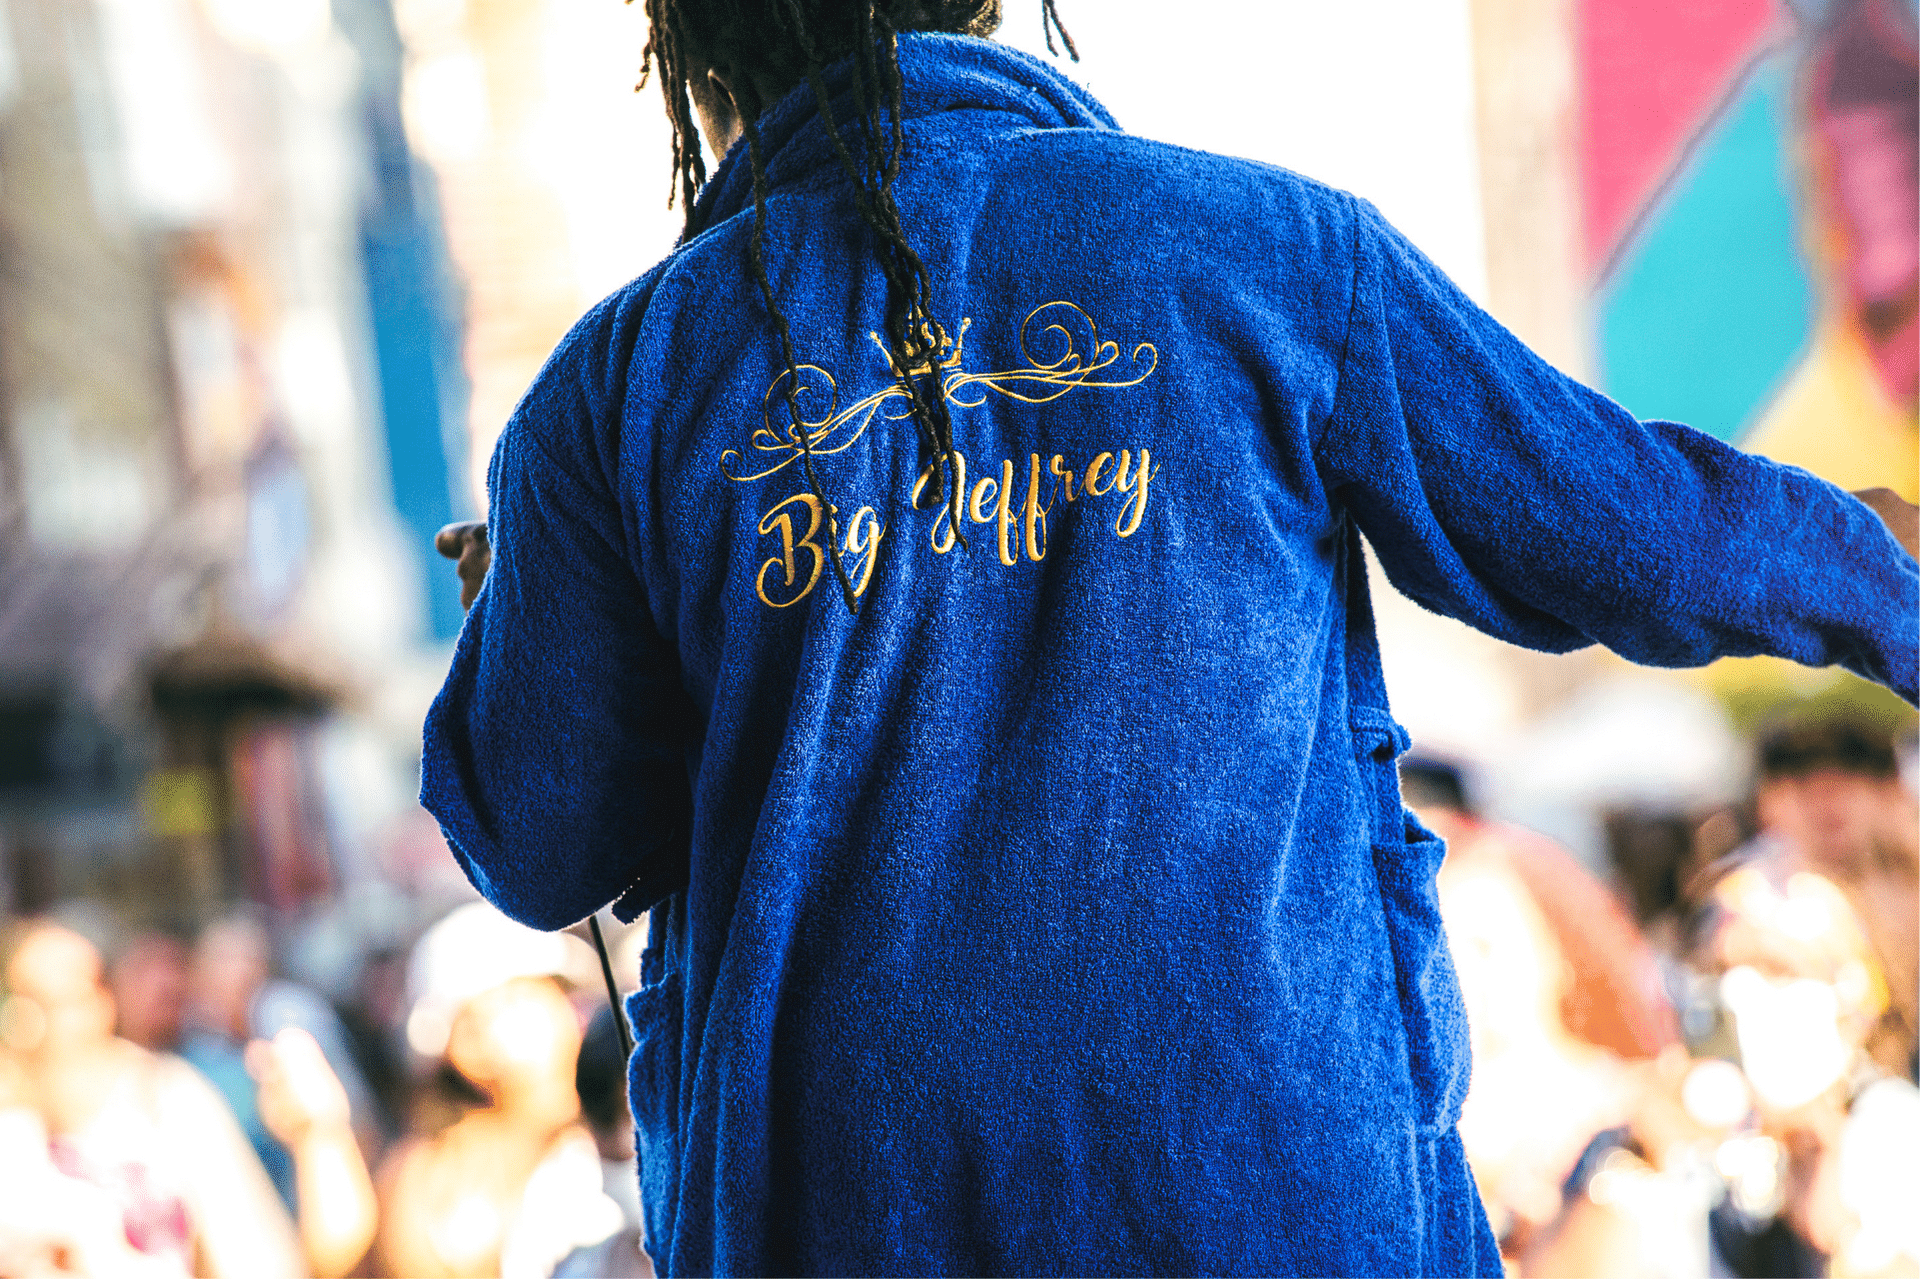 Skigh wore his signature robe with a gold stitching of "Big Jeffrey" during a live performance at Alley Fest in Flint.